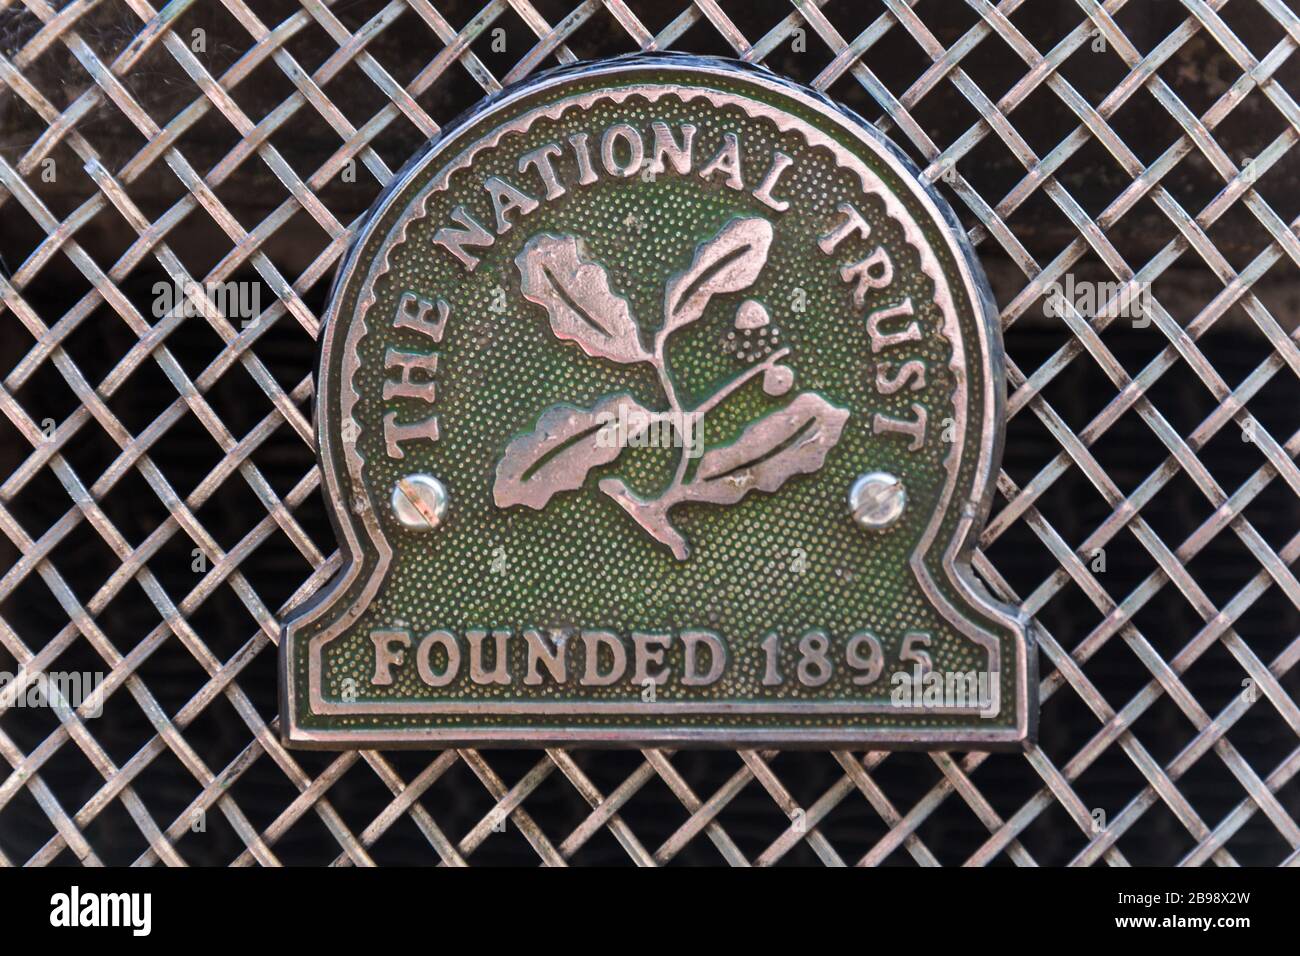 Green 'The National Trust founded 1895' vintage chrome metal car badge with oak leaf symbol mounted on wire mesh radiator grille of Austin Morris car. Stock Photo